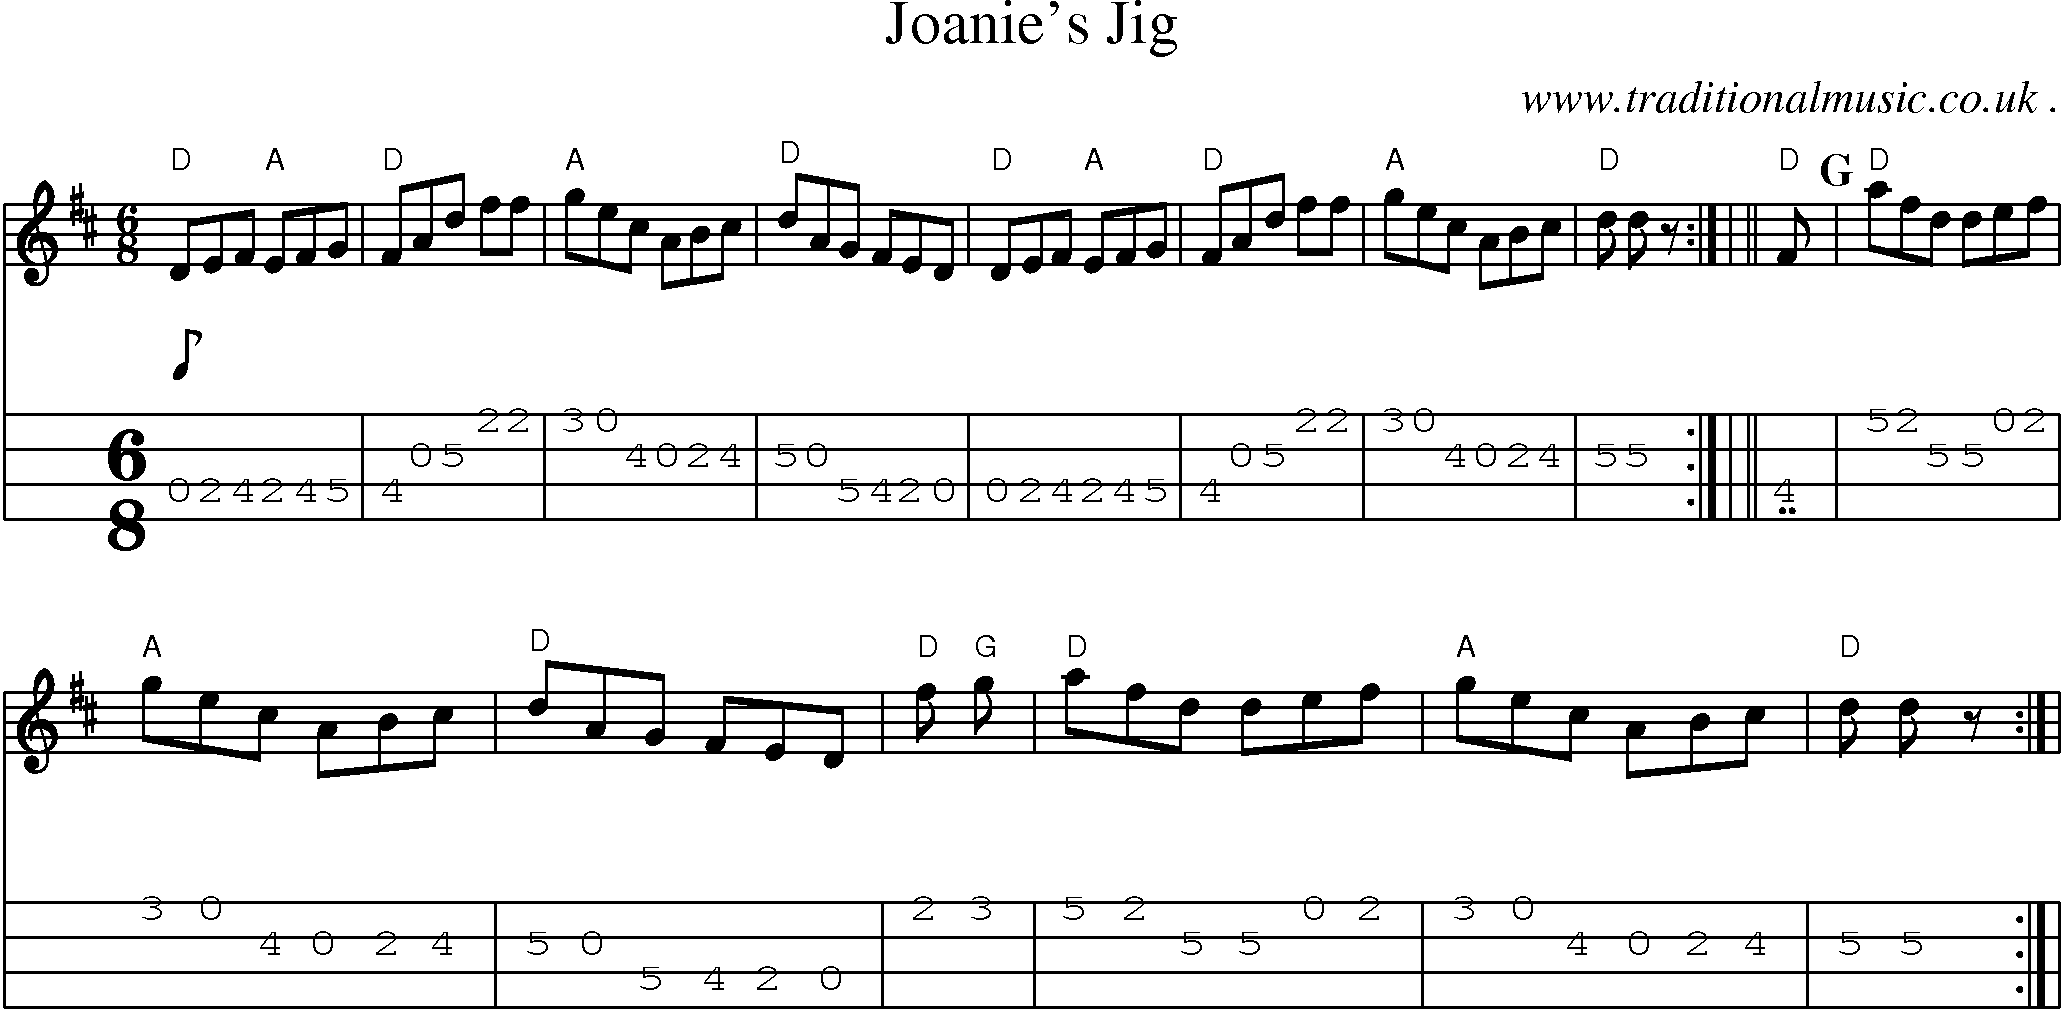 Sheet-music  score, Chords and Mandolin Tabs for Joanies Jig